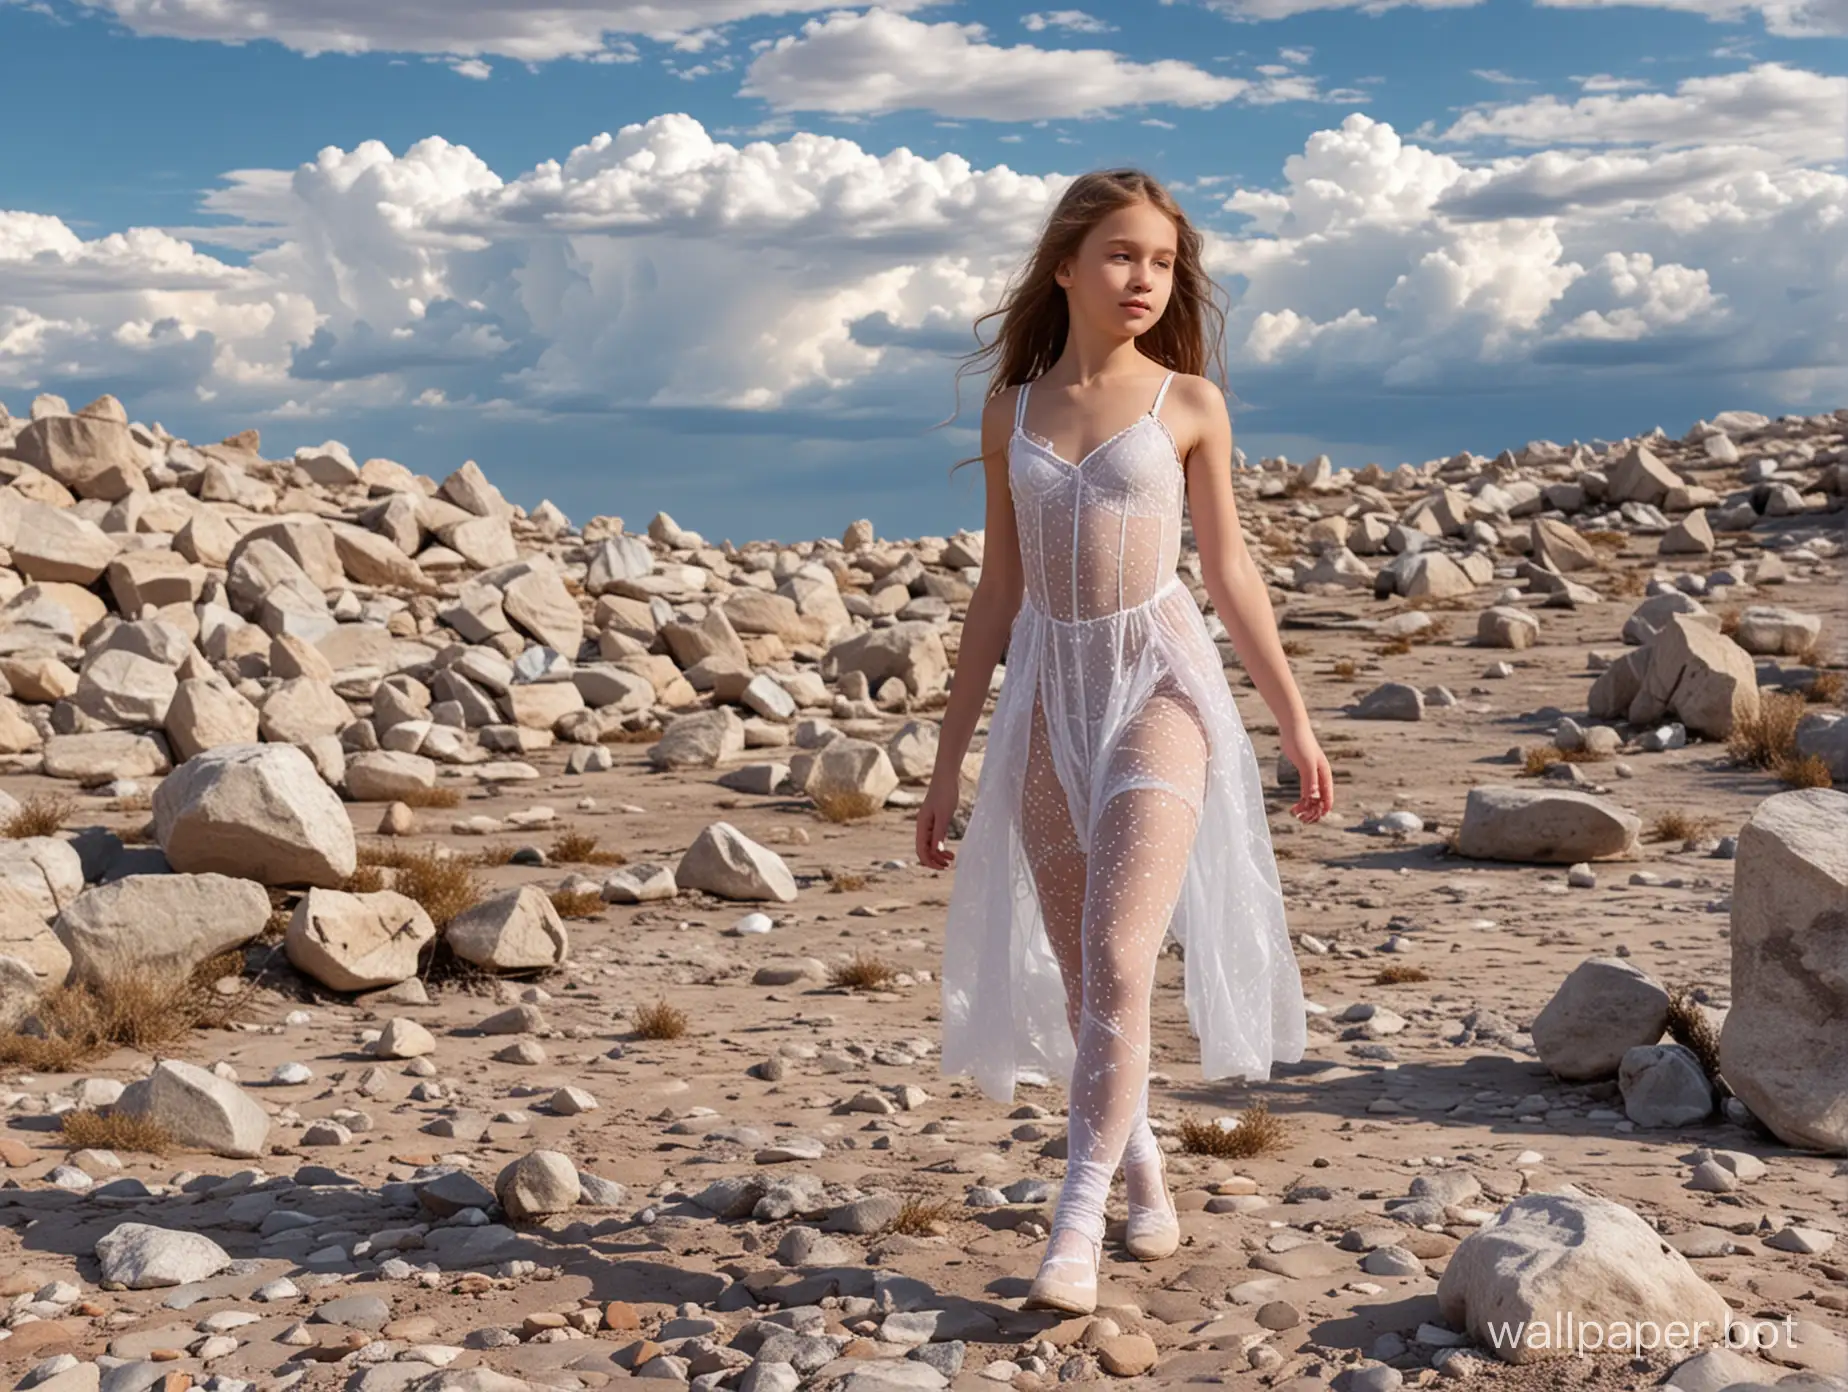 Russian girl 12 years old in a beautiful bodystocking walks on a stony planet under a gently opal sky with white clouds